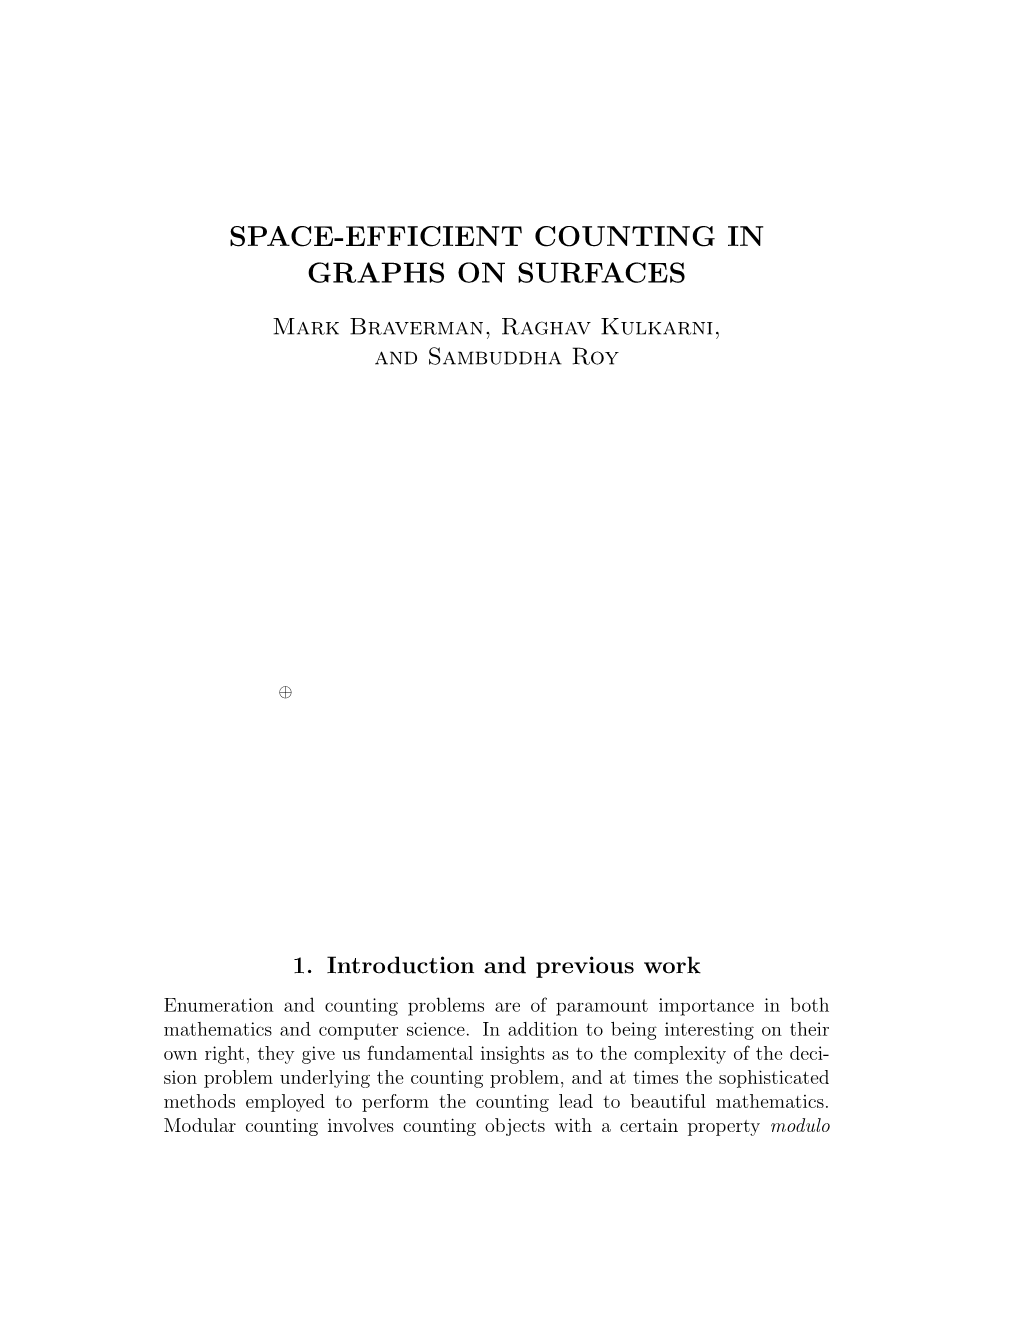 Space-Efficient Counting in Graphs on Surfaces